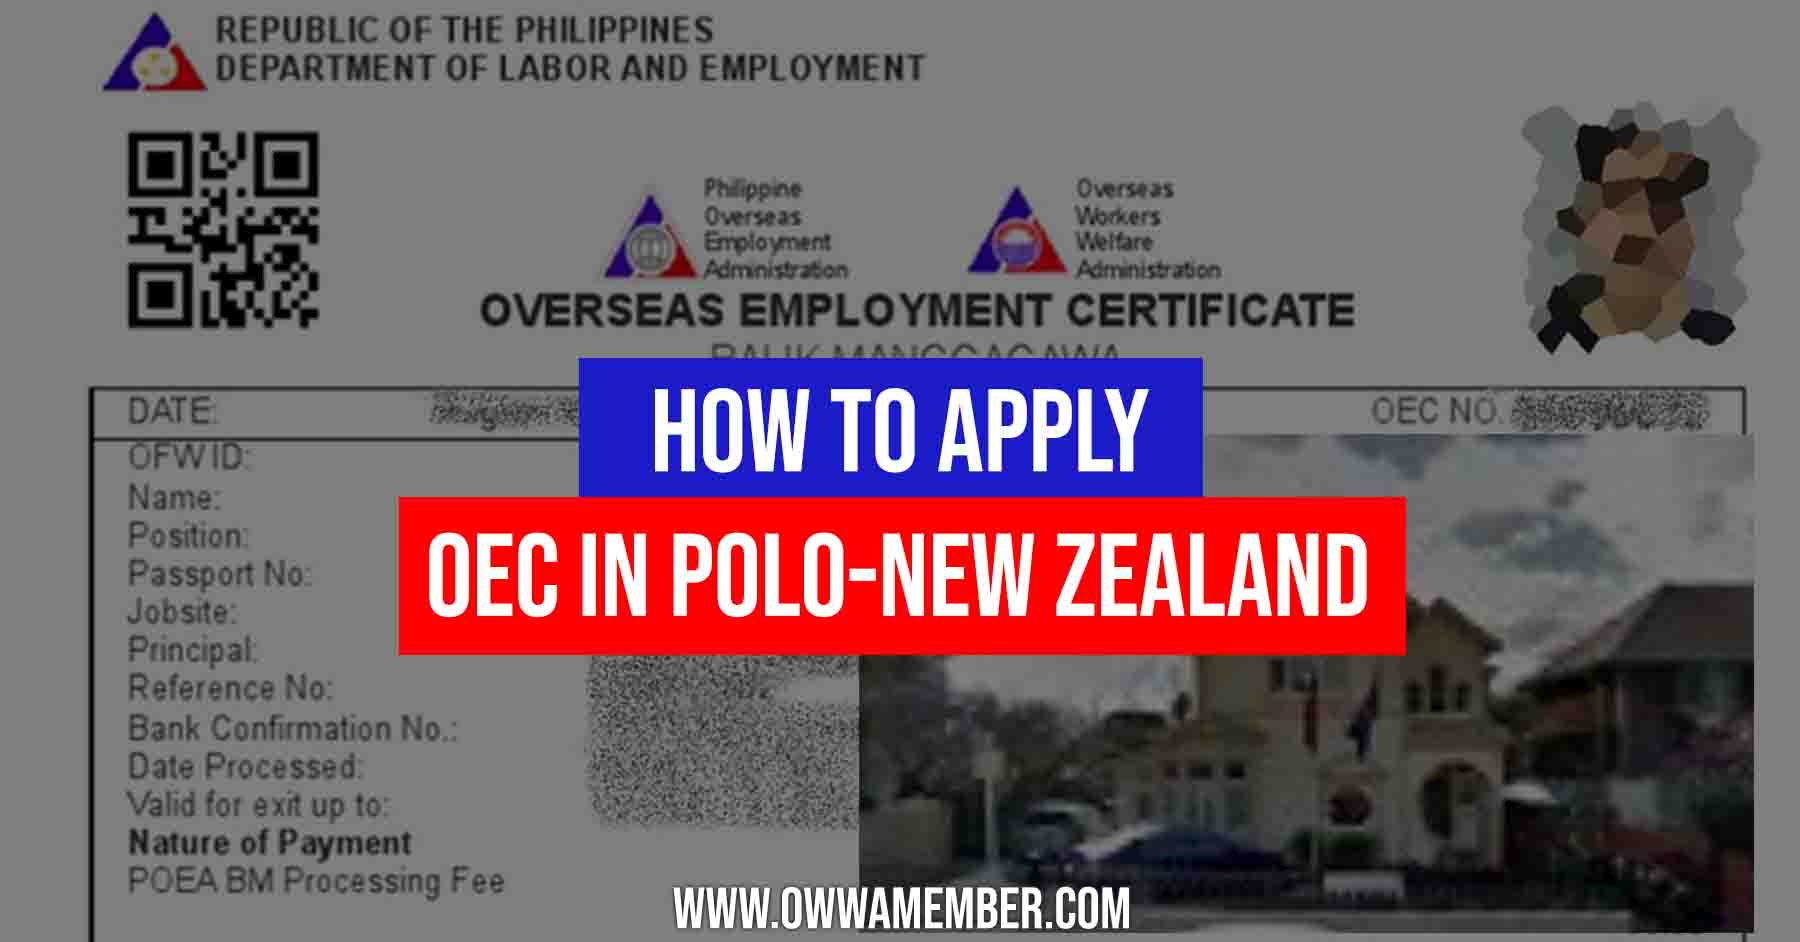 how to apply for oec in polo new zealand